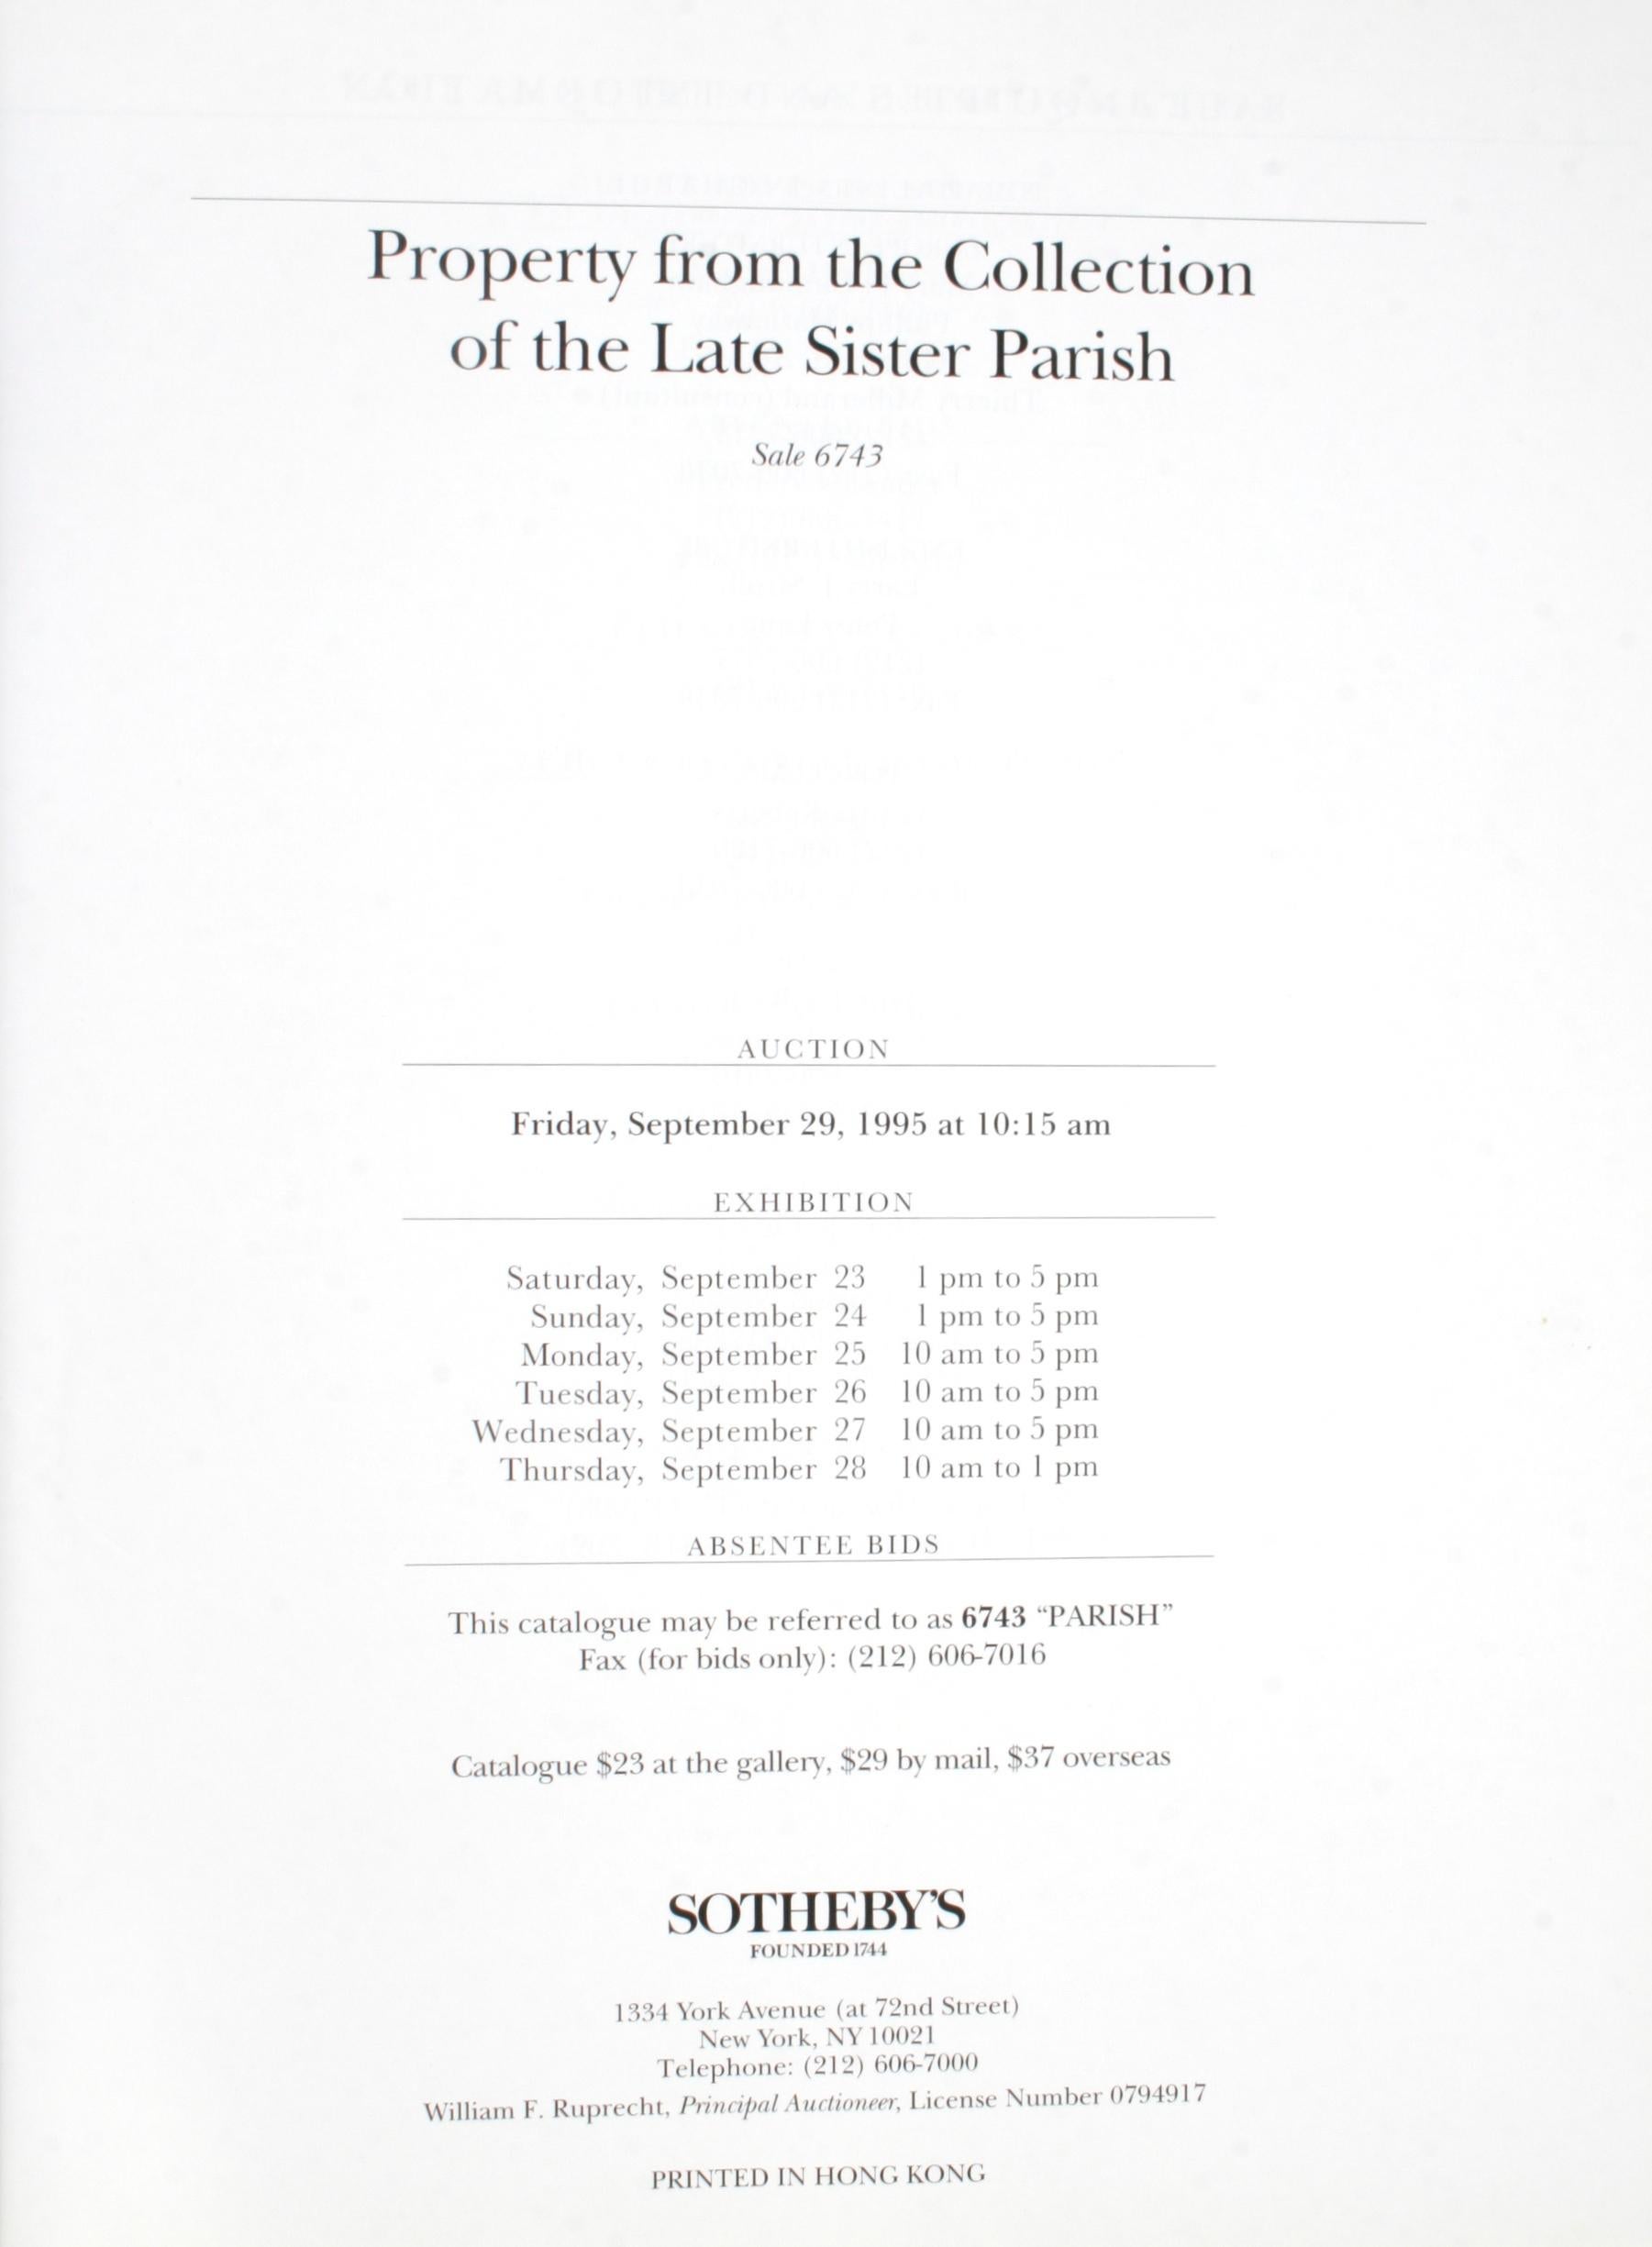 Sotheby's 1995 catalogue, property from the collection of the Late Sister Parish. Sister Parish (born Dorothy May Kinnicutt) was an American interior decorator and socialite. She was the first decorator brought in to decorate the Kennedy White